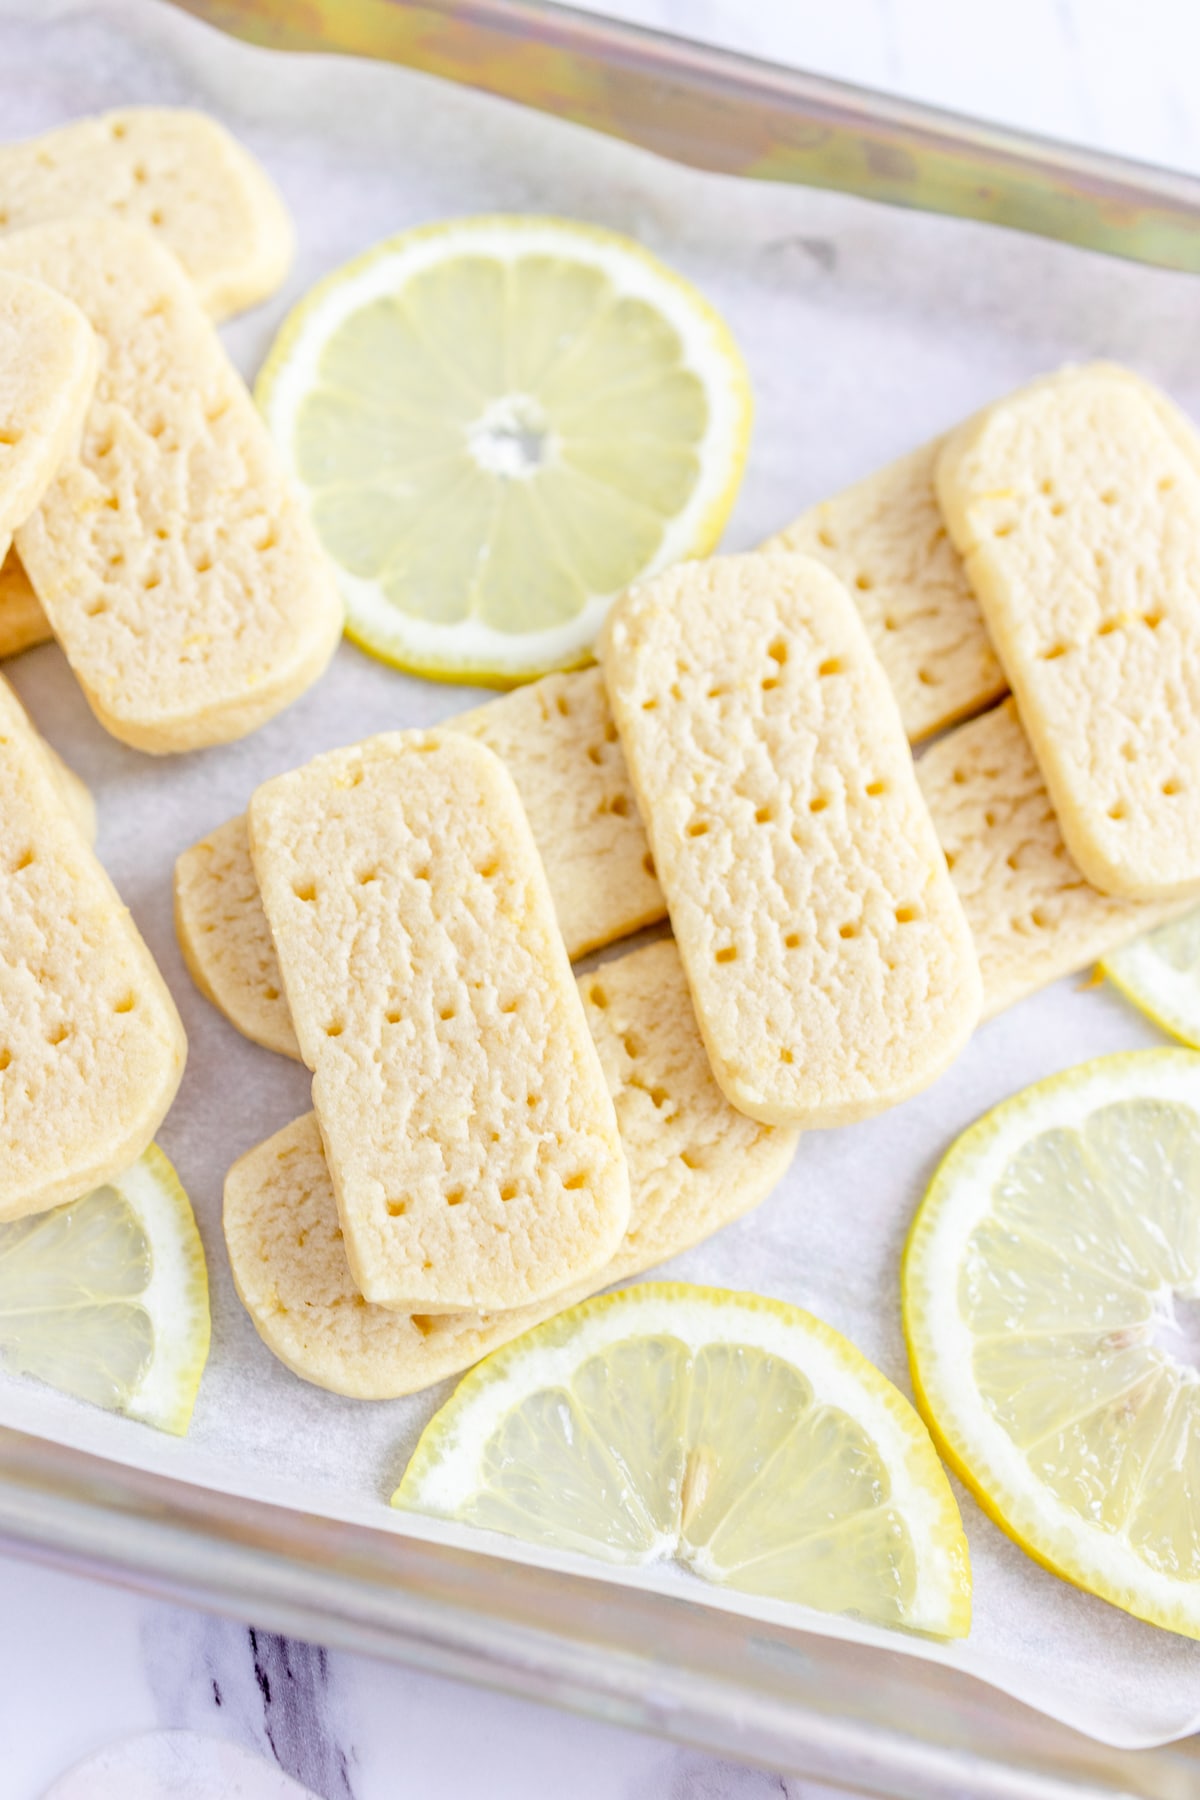 Top view of Shortbread Cookies on a baking tray surrounded by slices of fresh lemon.